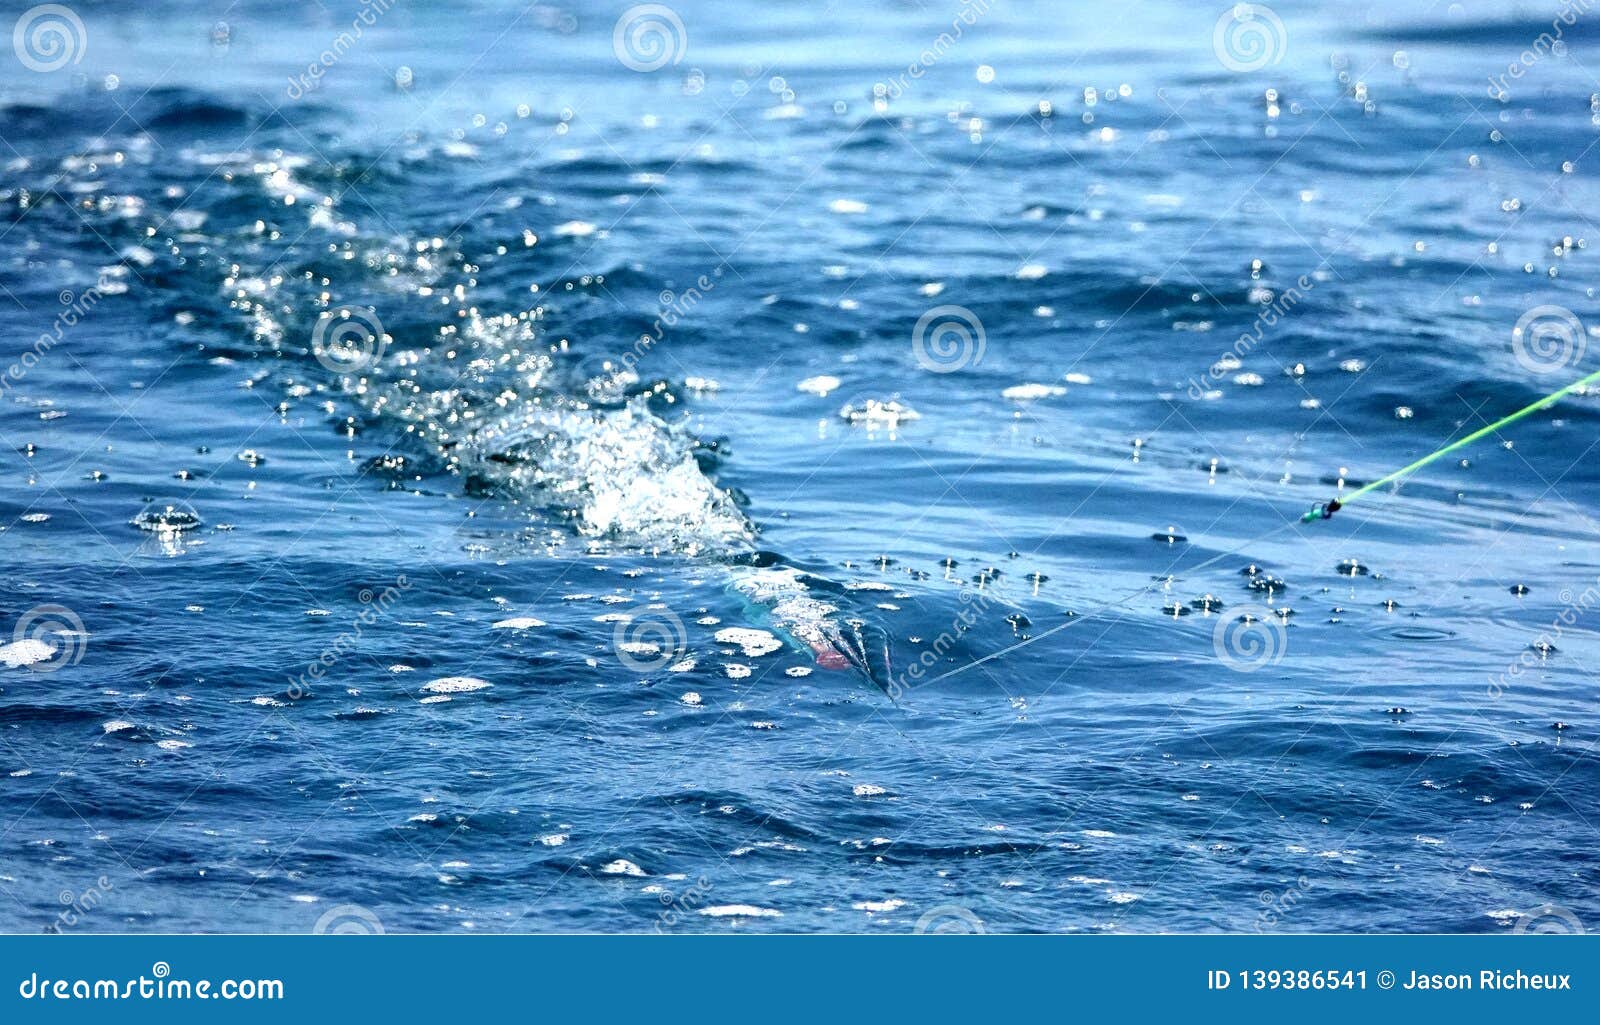 Big Bubble Trail from a Trolling Lure, Sportfishing Dragging a Lure, Making  Bubbles. Stock Image - Image of blue, making: 139386541